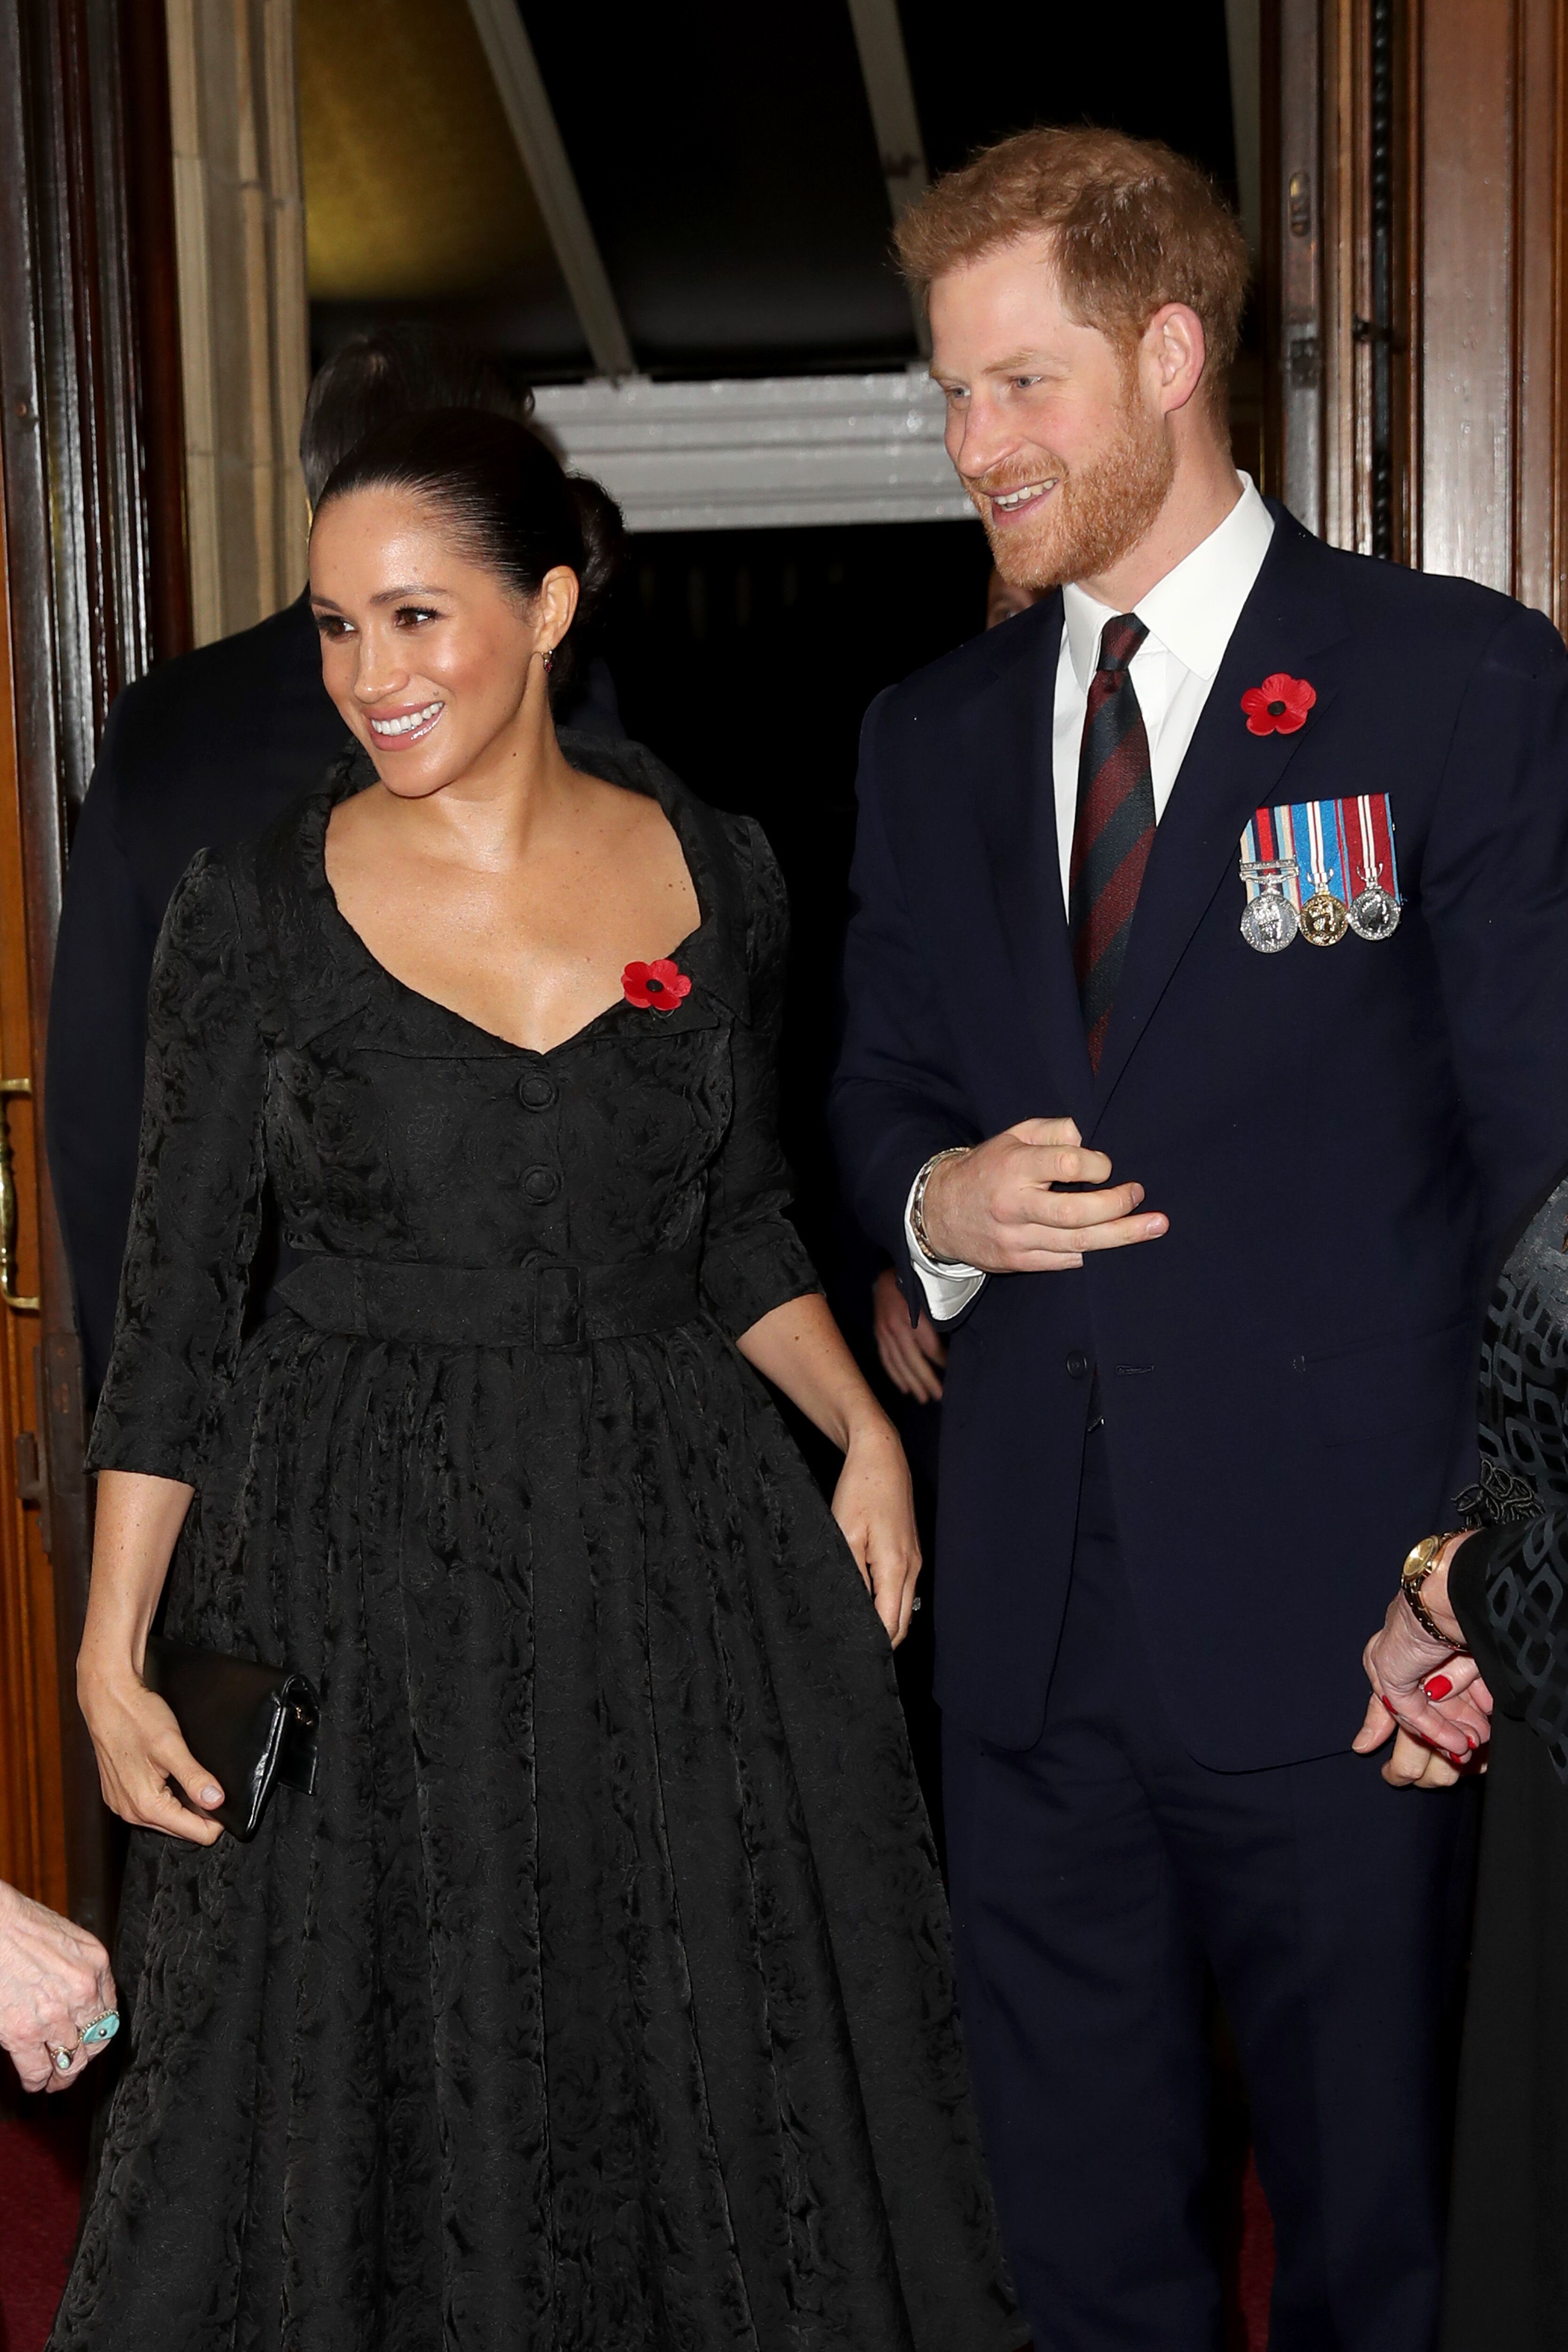 The Duke and Duchess of Sussex joined the Queen to the annual Royal British Legion Festival of Remembrance at the Royal Albert Hall | Source: Getty Images/GlobalImagesUkraine